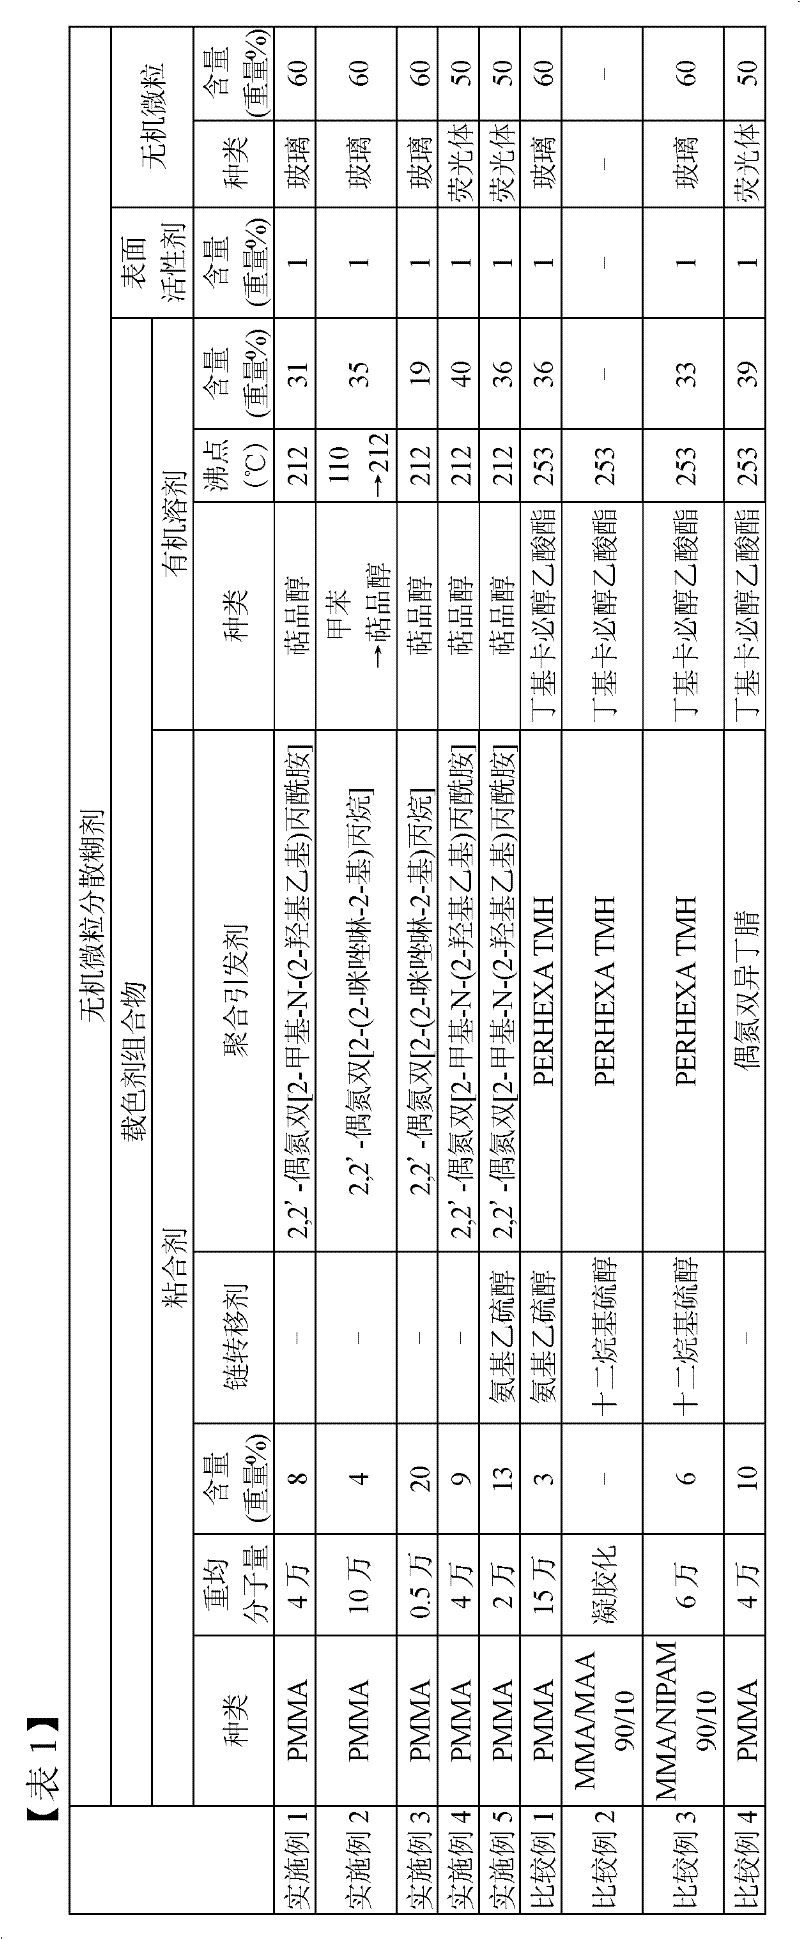 Inorganic microparticle-dispersed paste composition